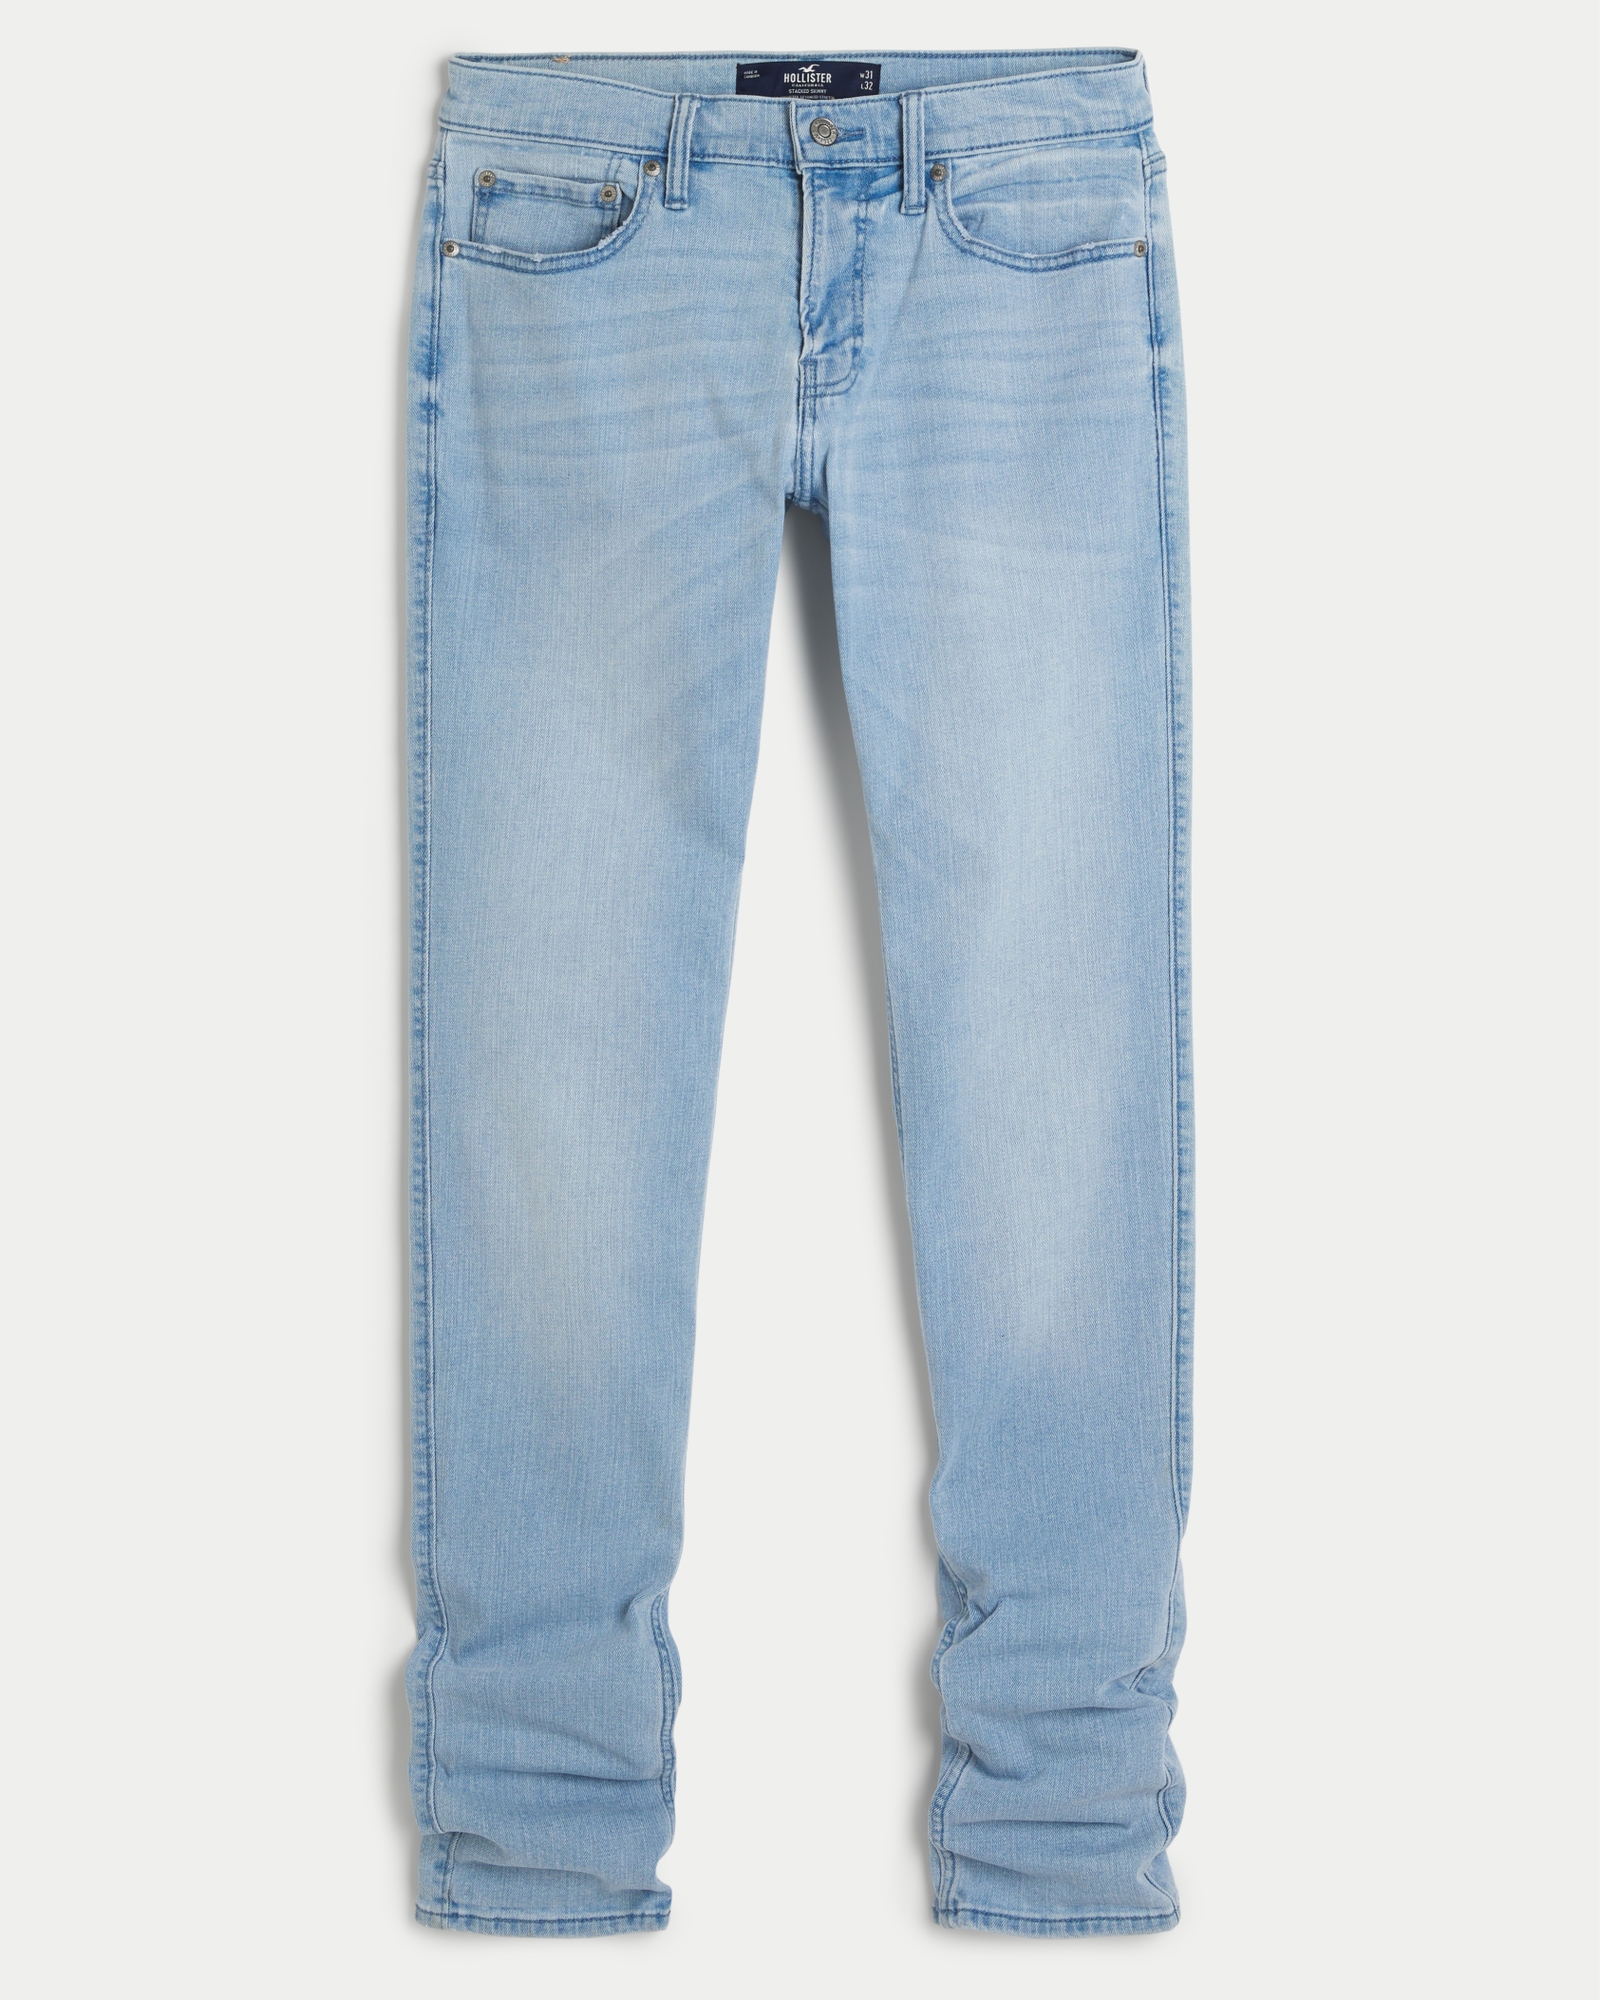 https://img.hollisterco.com/is/image/anf/KIC_331-1022-2515-280_prod1.jpg?policy=product-extra-large